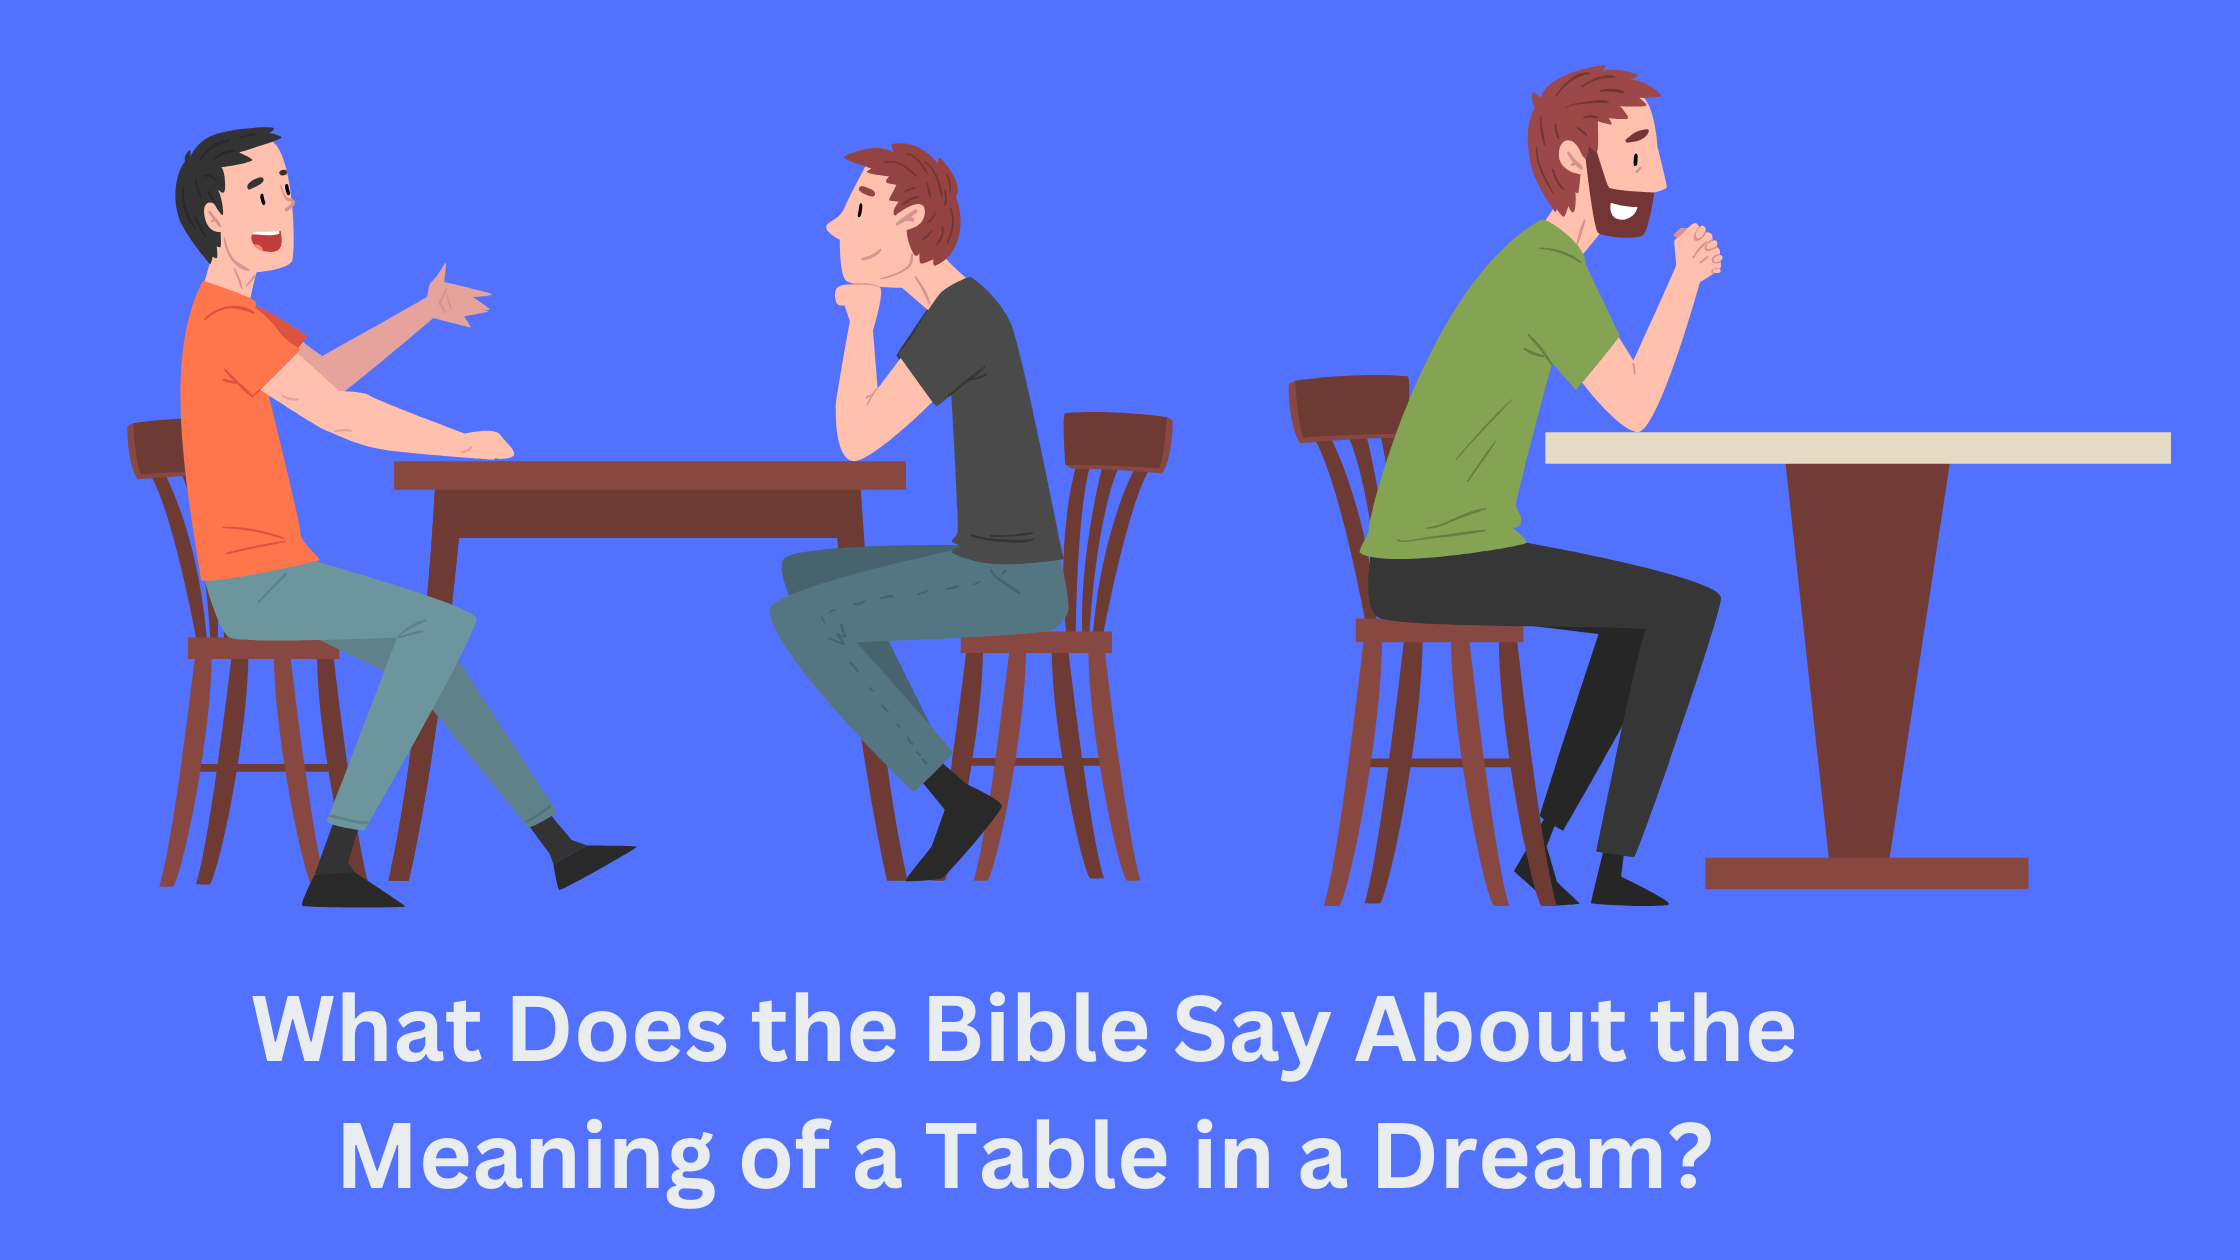 What Does the Bible Say About the Meaning of a Table in a Dream